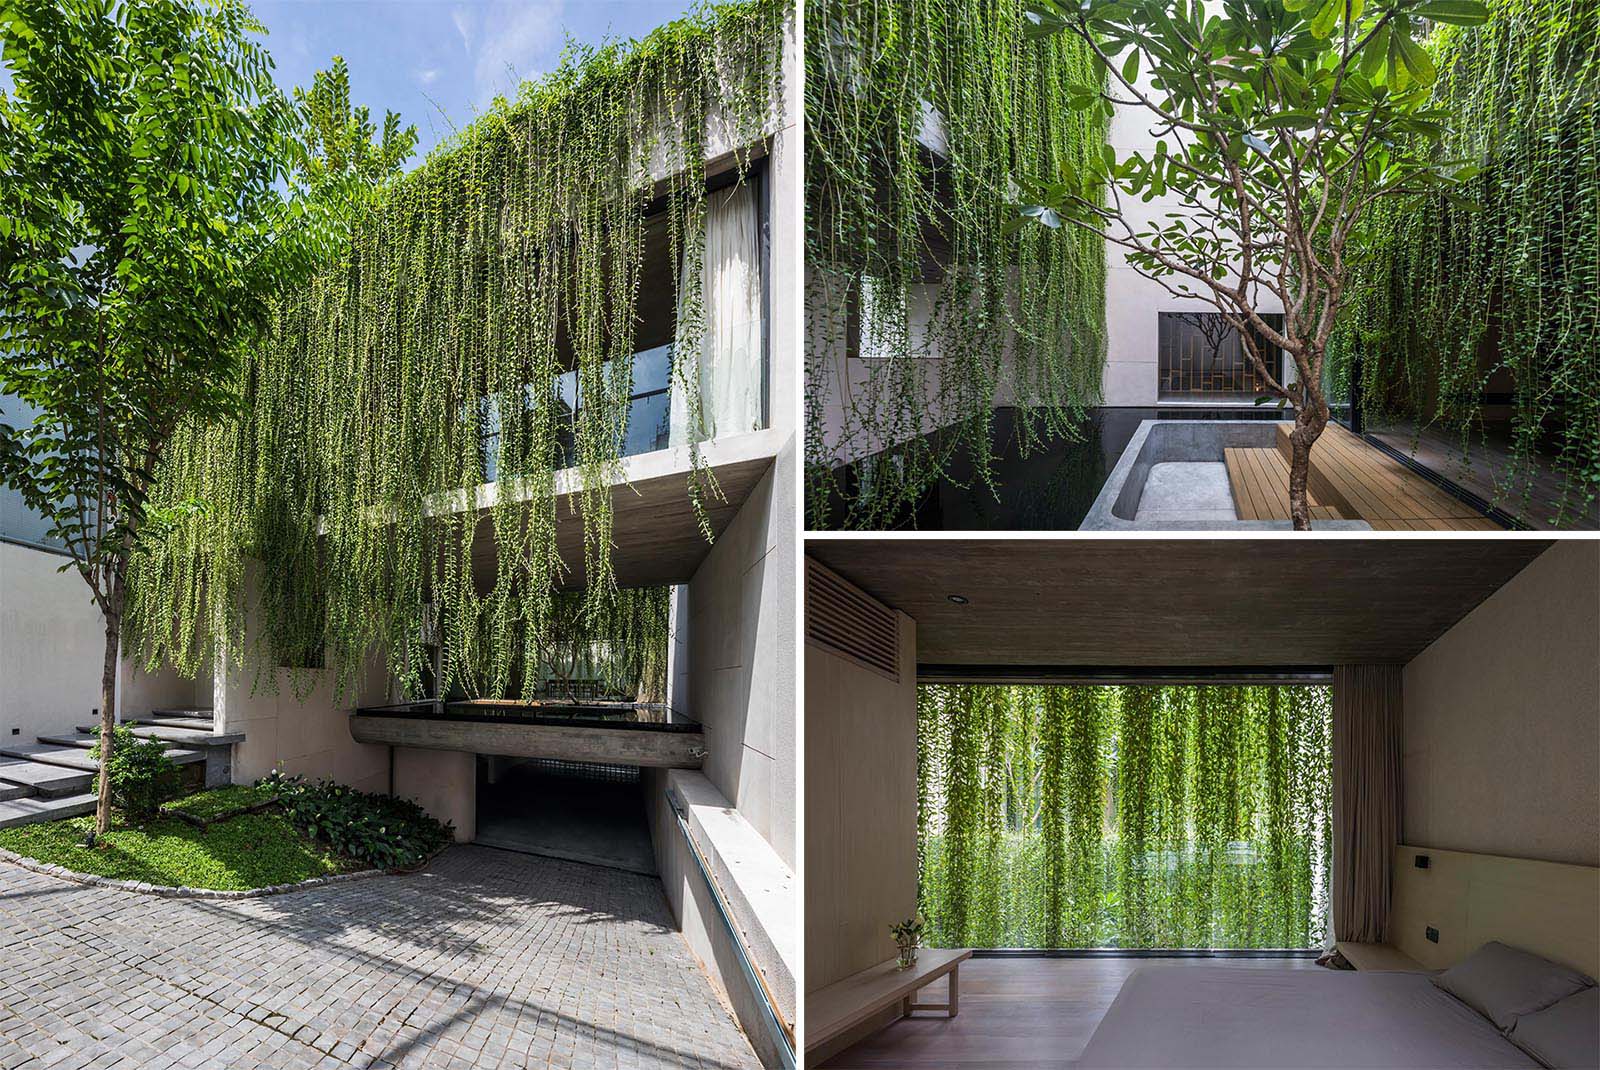 A modern house with overhanging plants.